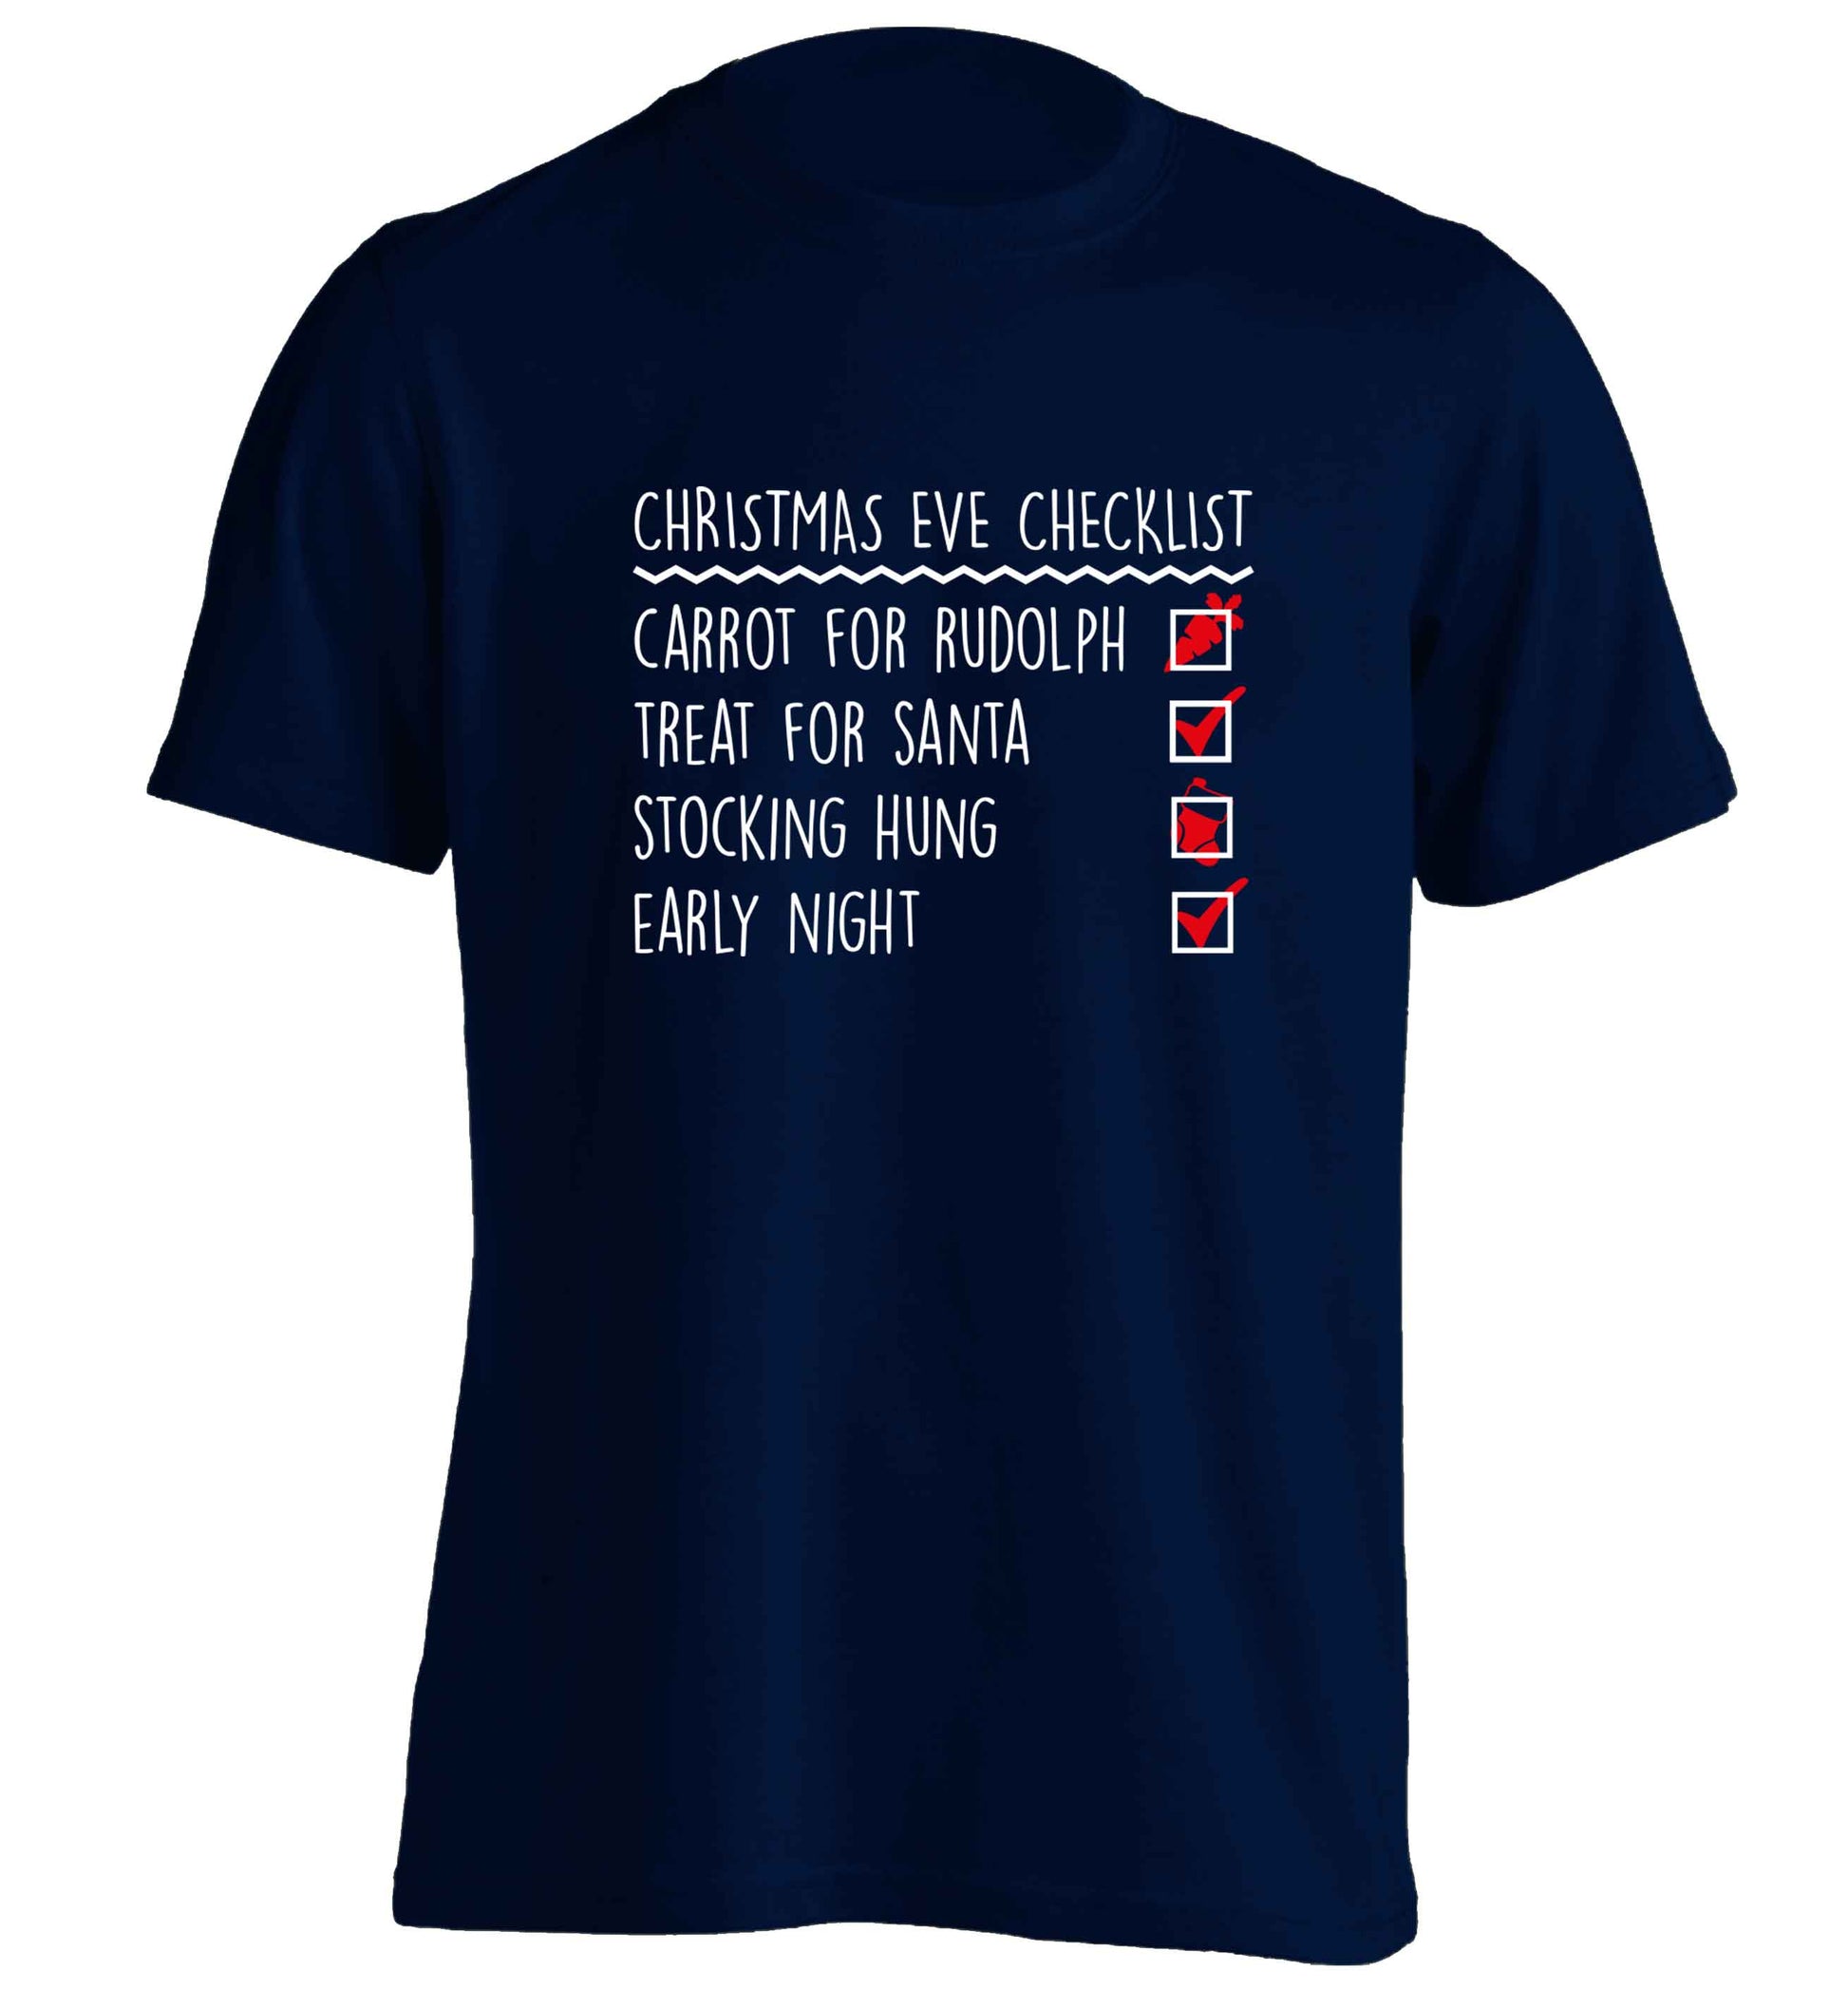 Candy Canes Candy Corns adults unisex navy Tshirt 2XL